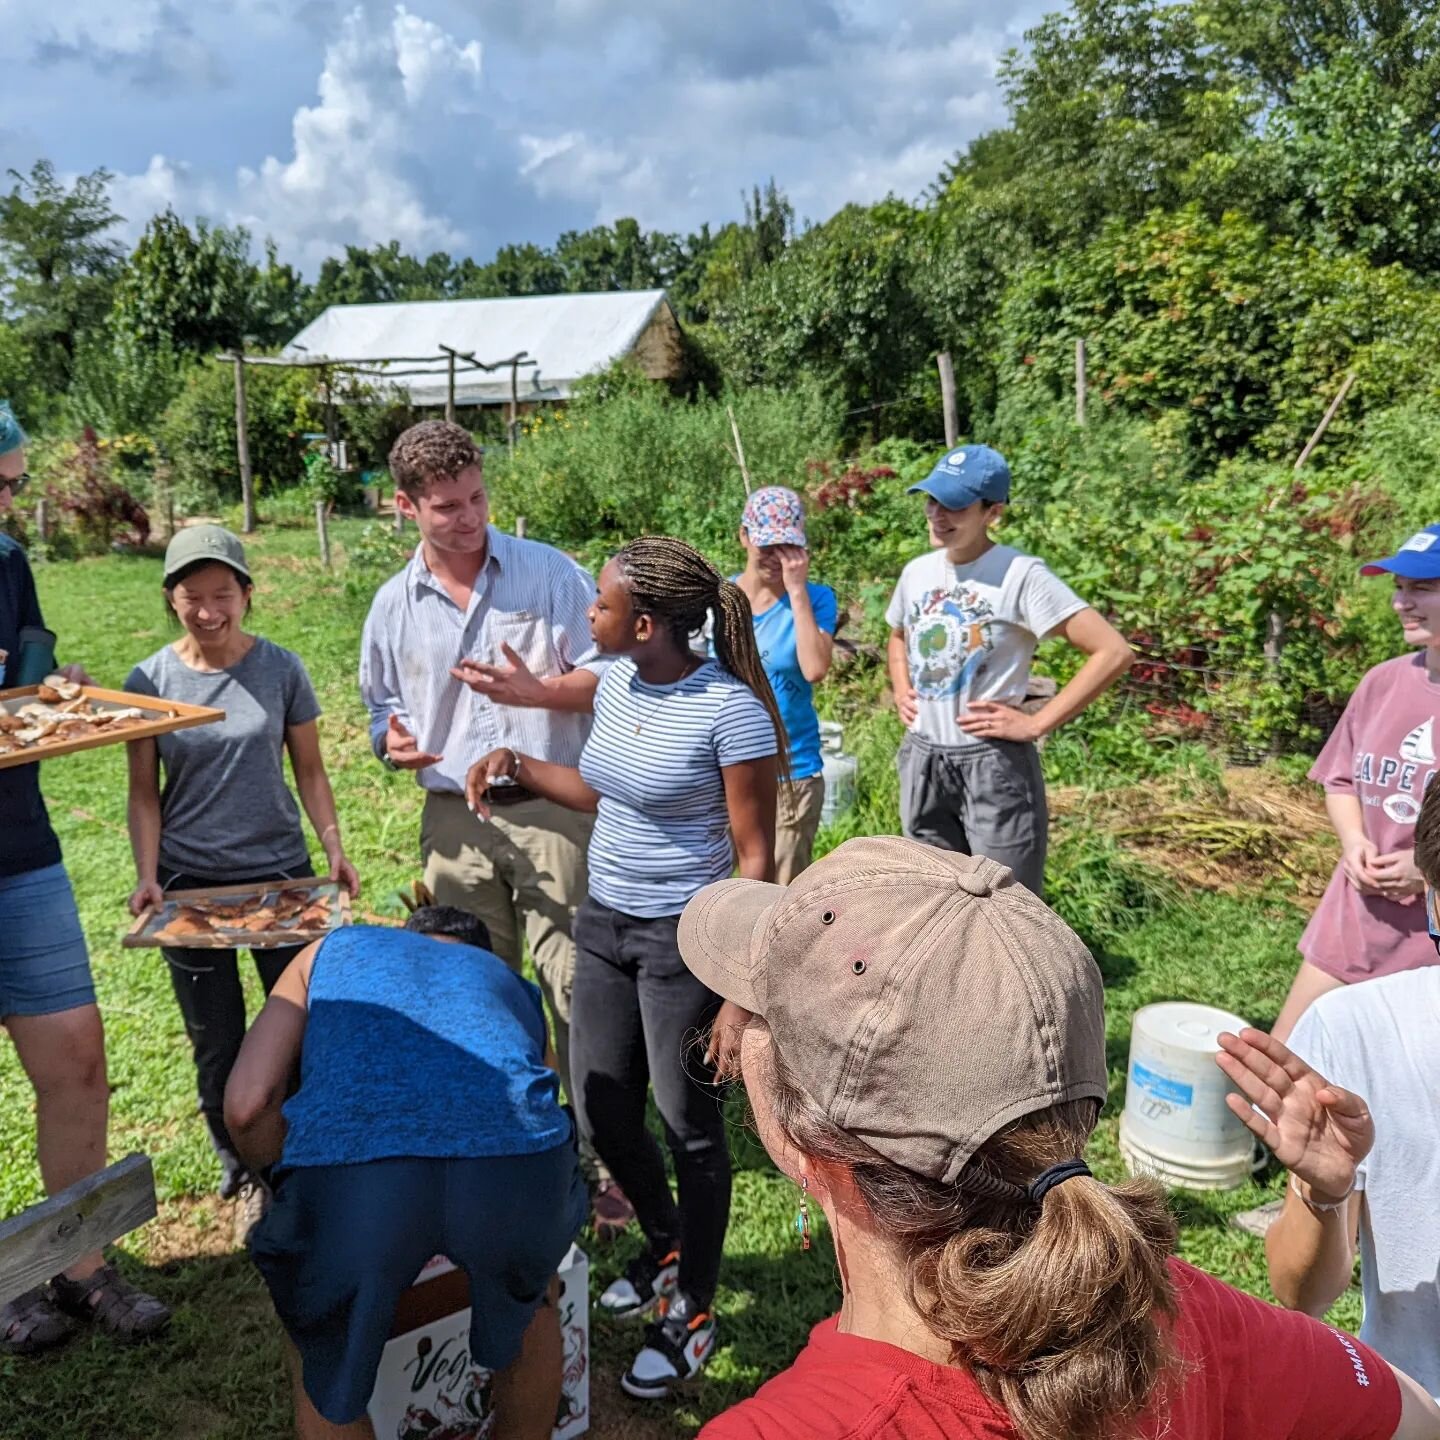 Harvesting #shiitakemushrooms and putting in the #solardehydrator with the #umdglobalstewards. Thanks for all your help today and best wishes with your program!